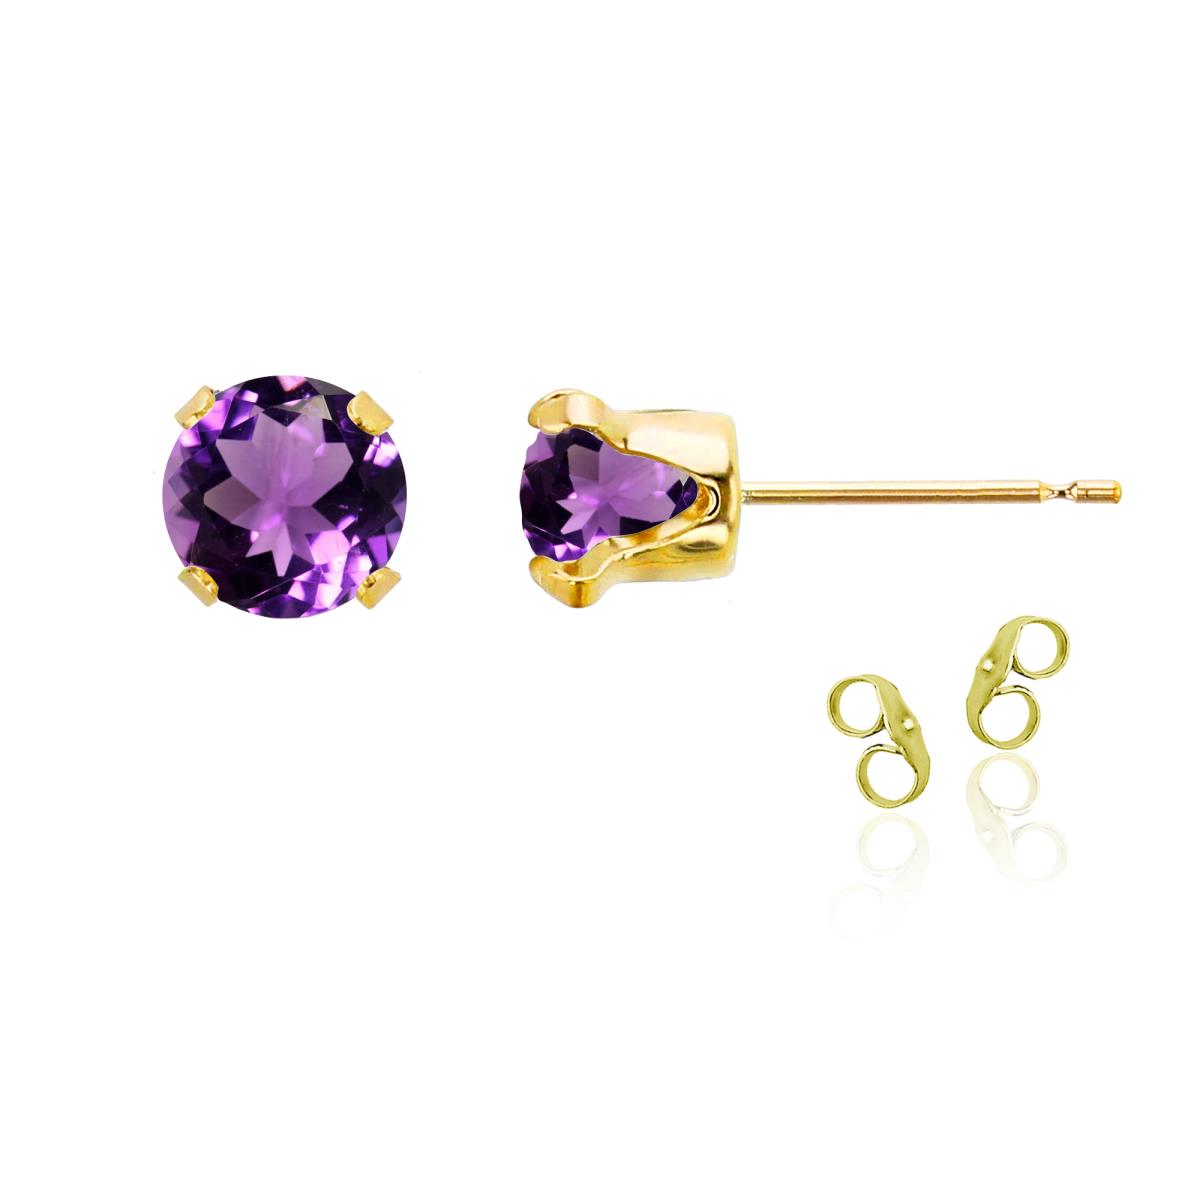 Sterling Silver Yellow 6mm Round Amethyst Stud Earring with Clutch